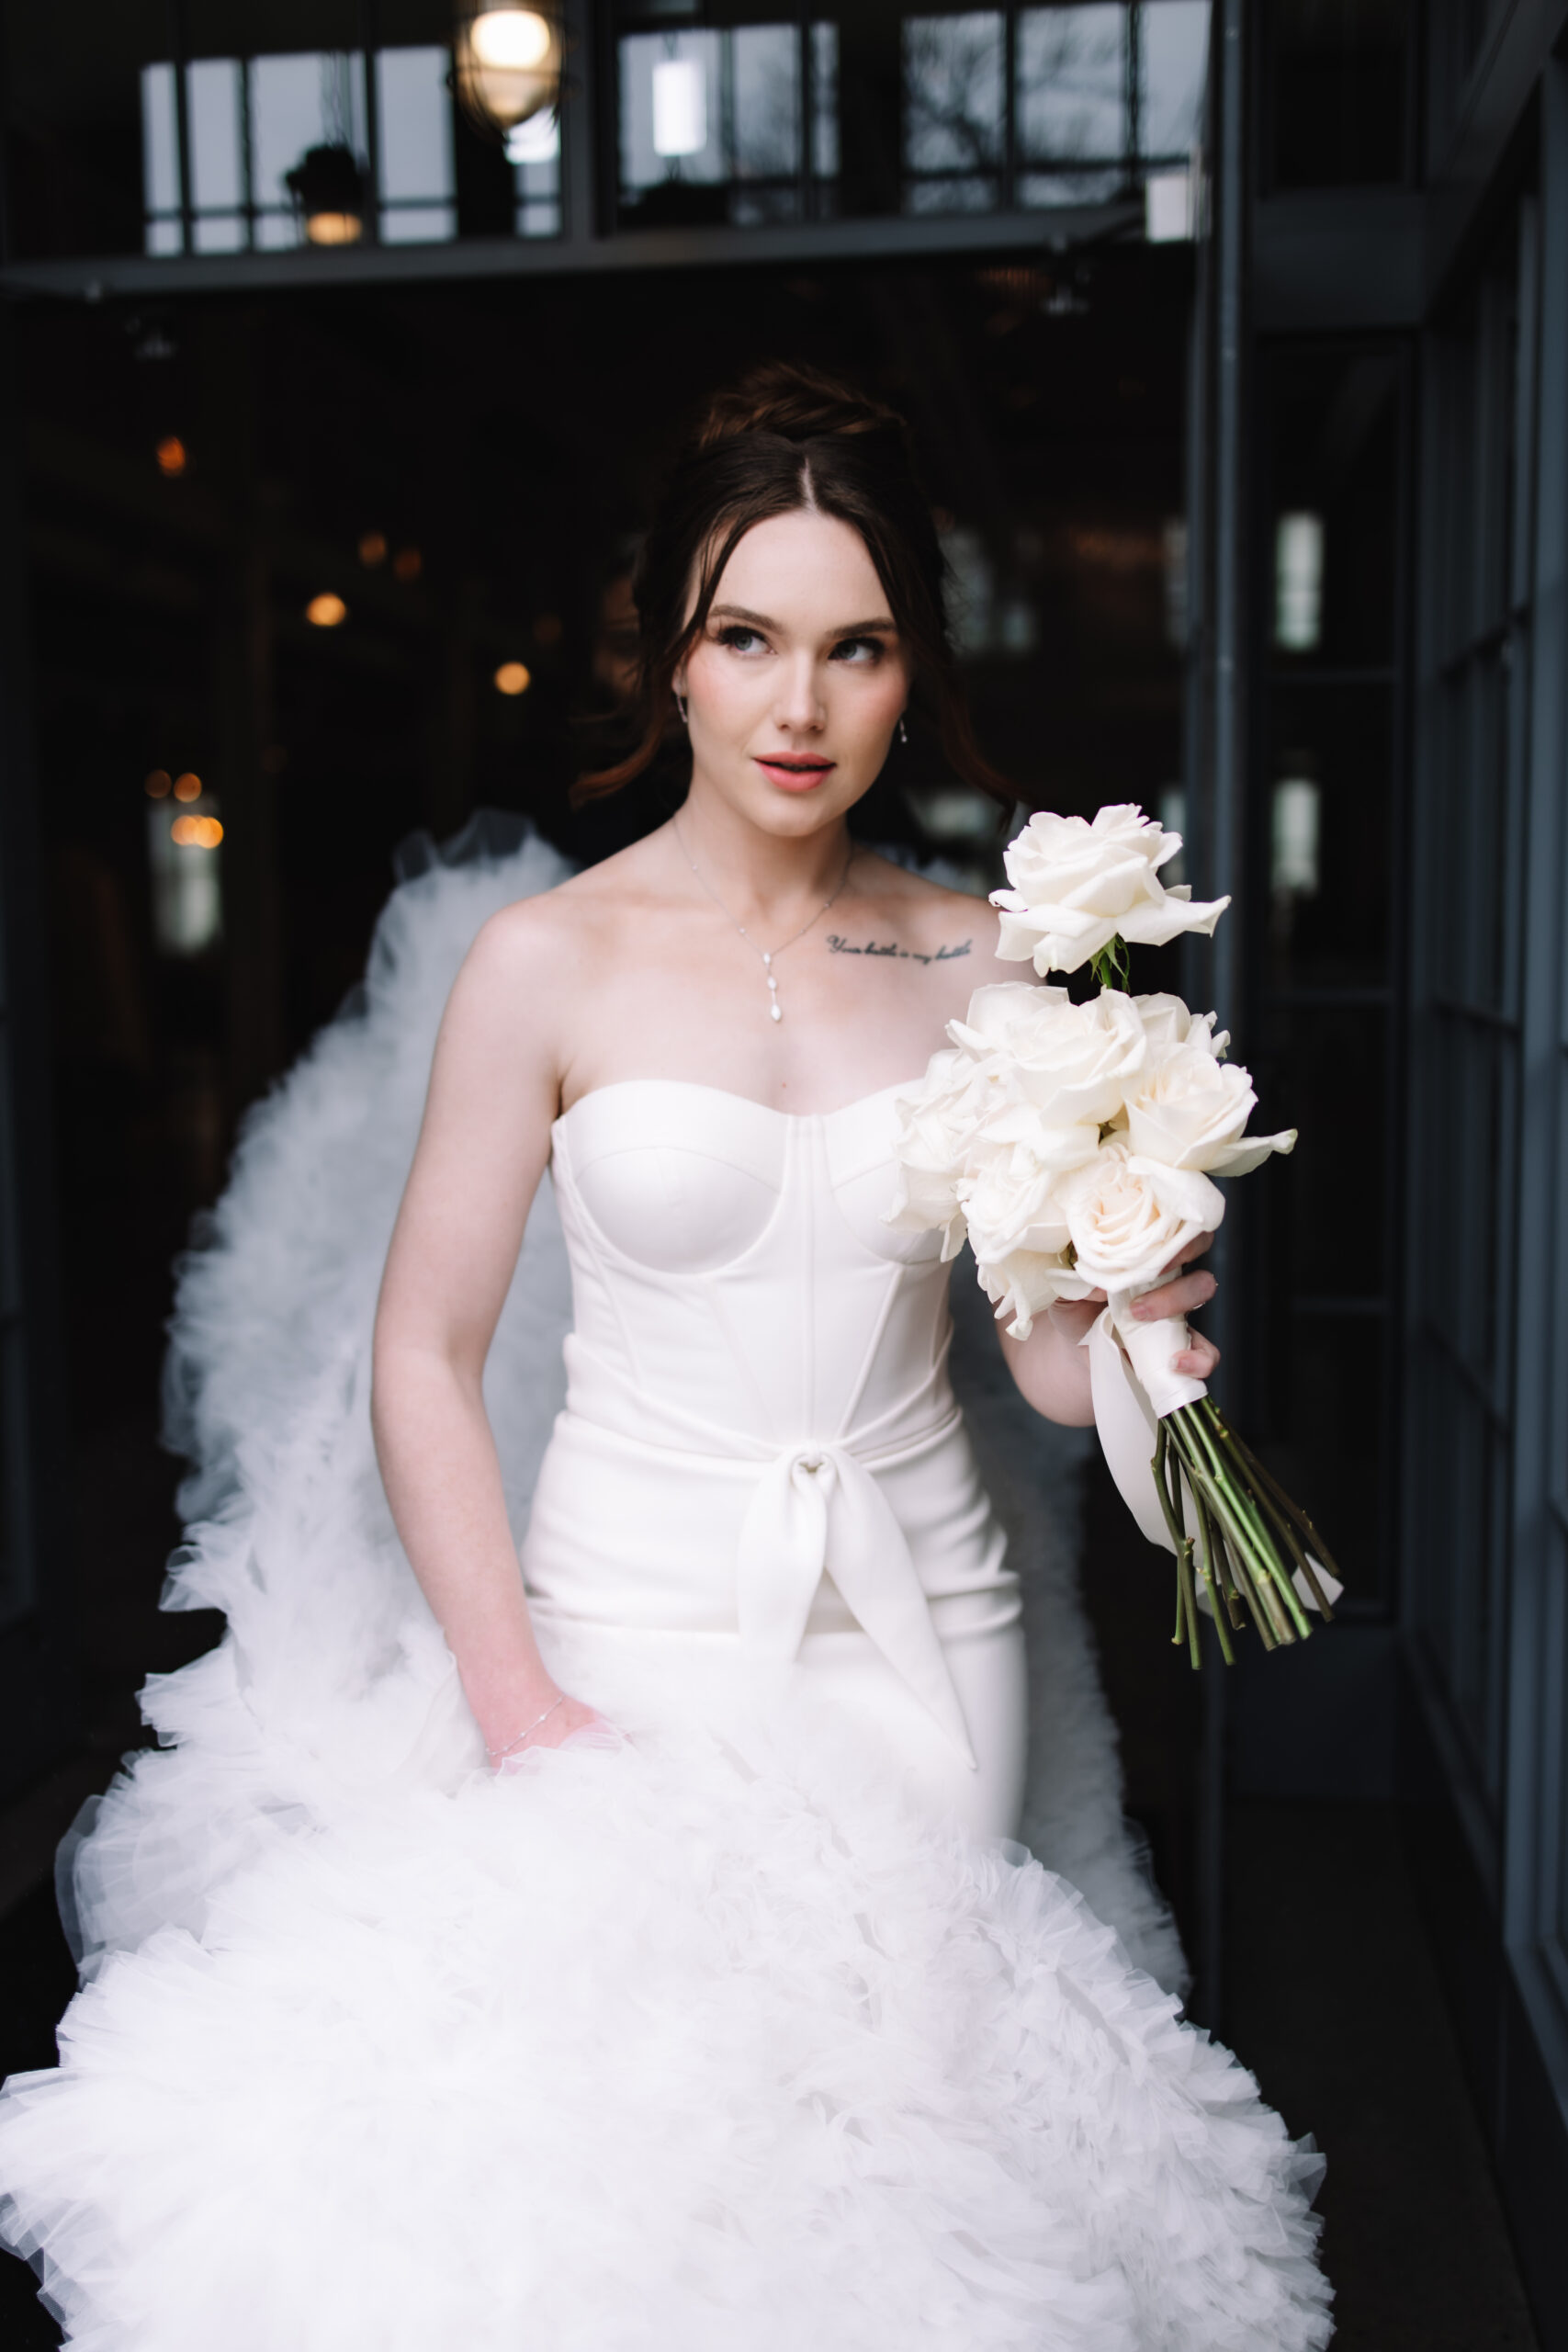 A beautiful modern bride in a voluptuous wedding dress walking out the door holding her white rose bouquet